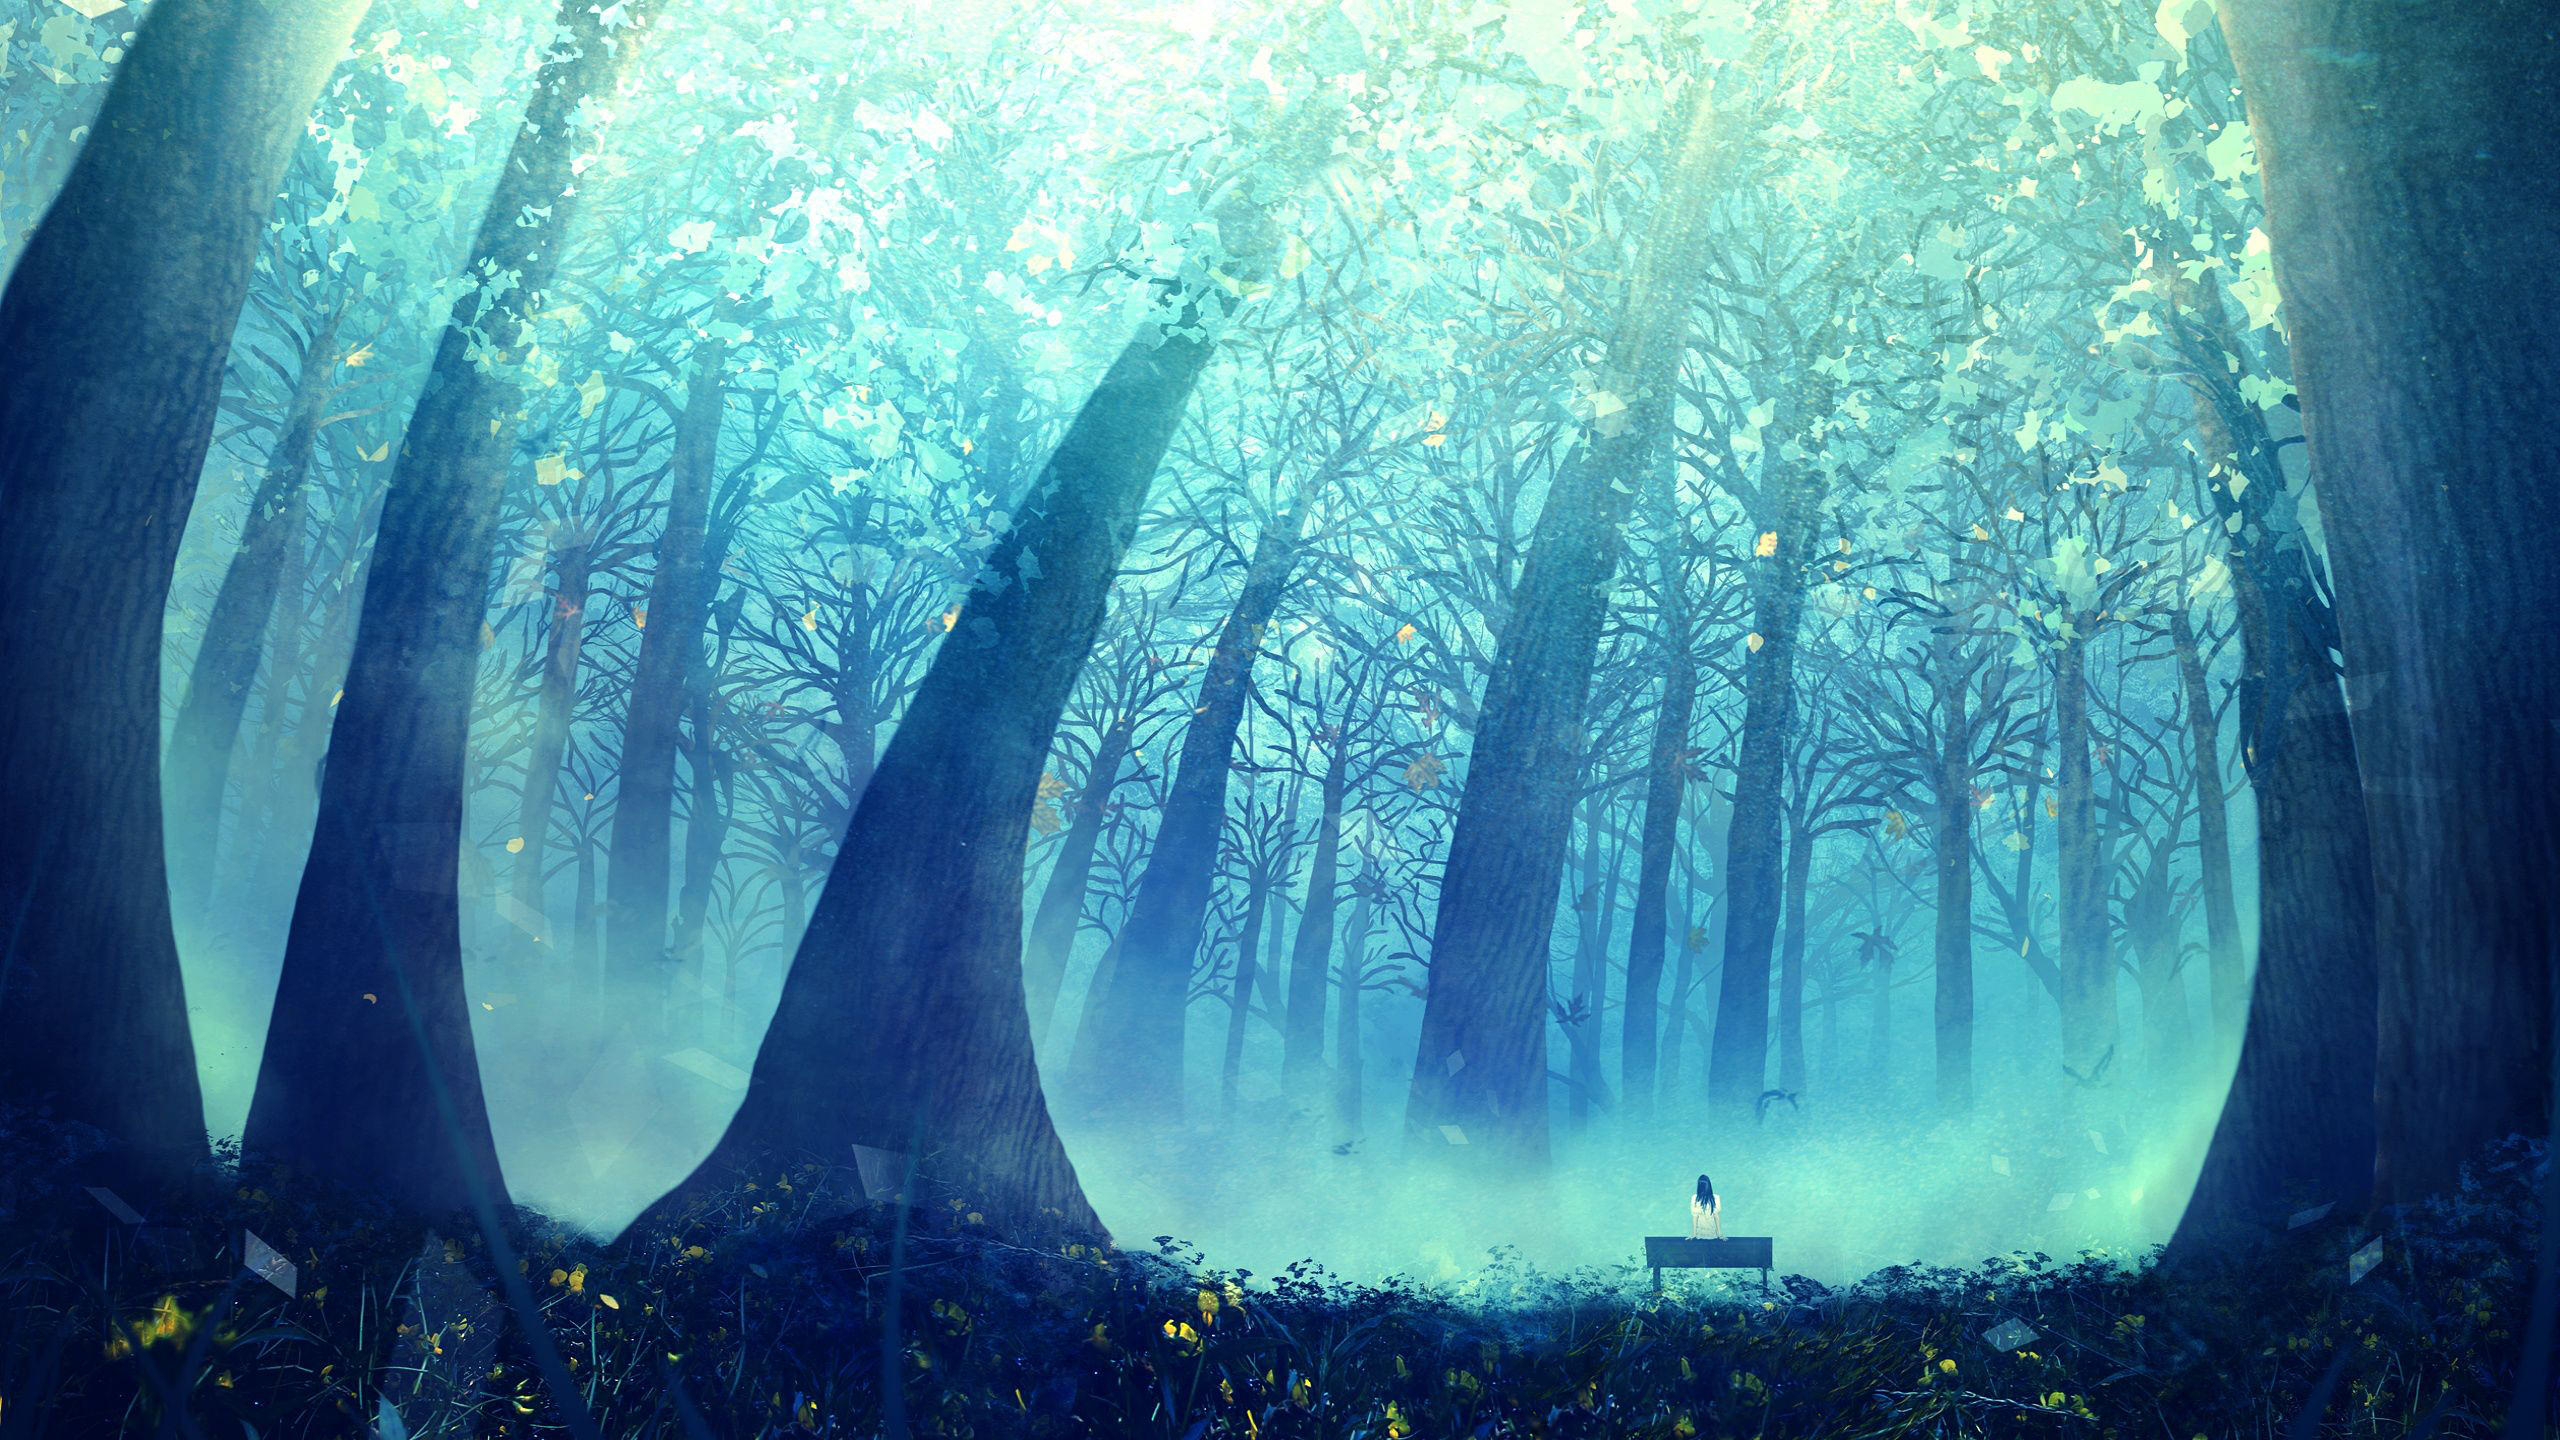 Free Anime Scene Green Background Images Animation Scene Forest Green  Background Material Photo Background PNG and Vectors  Forest photography  Forest painting Forest landscape